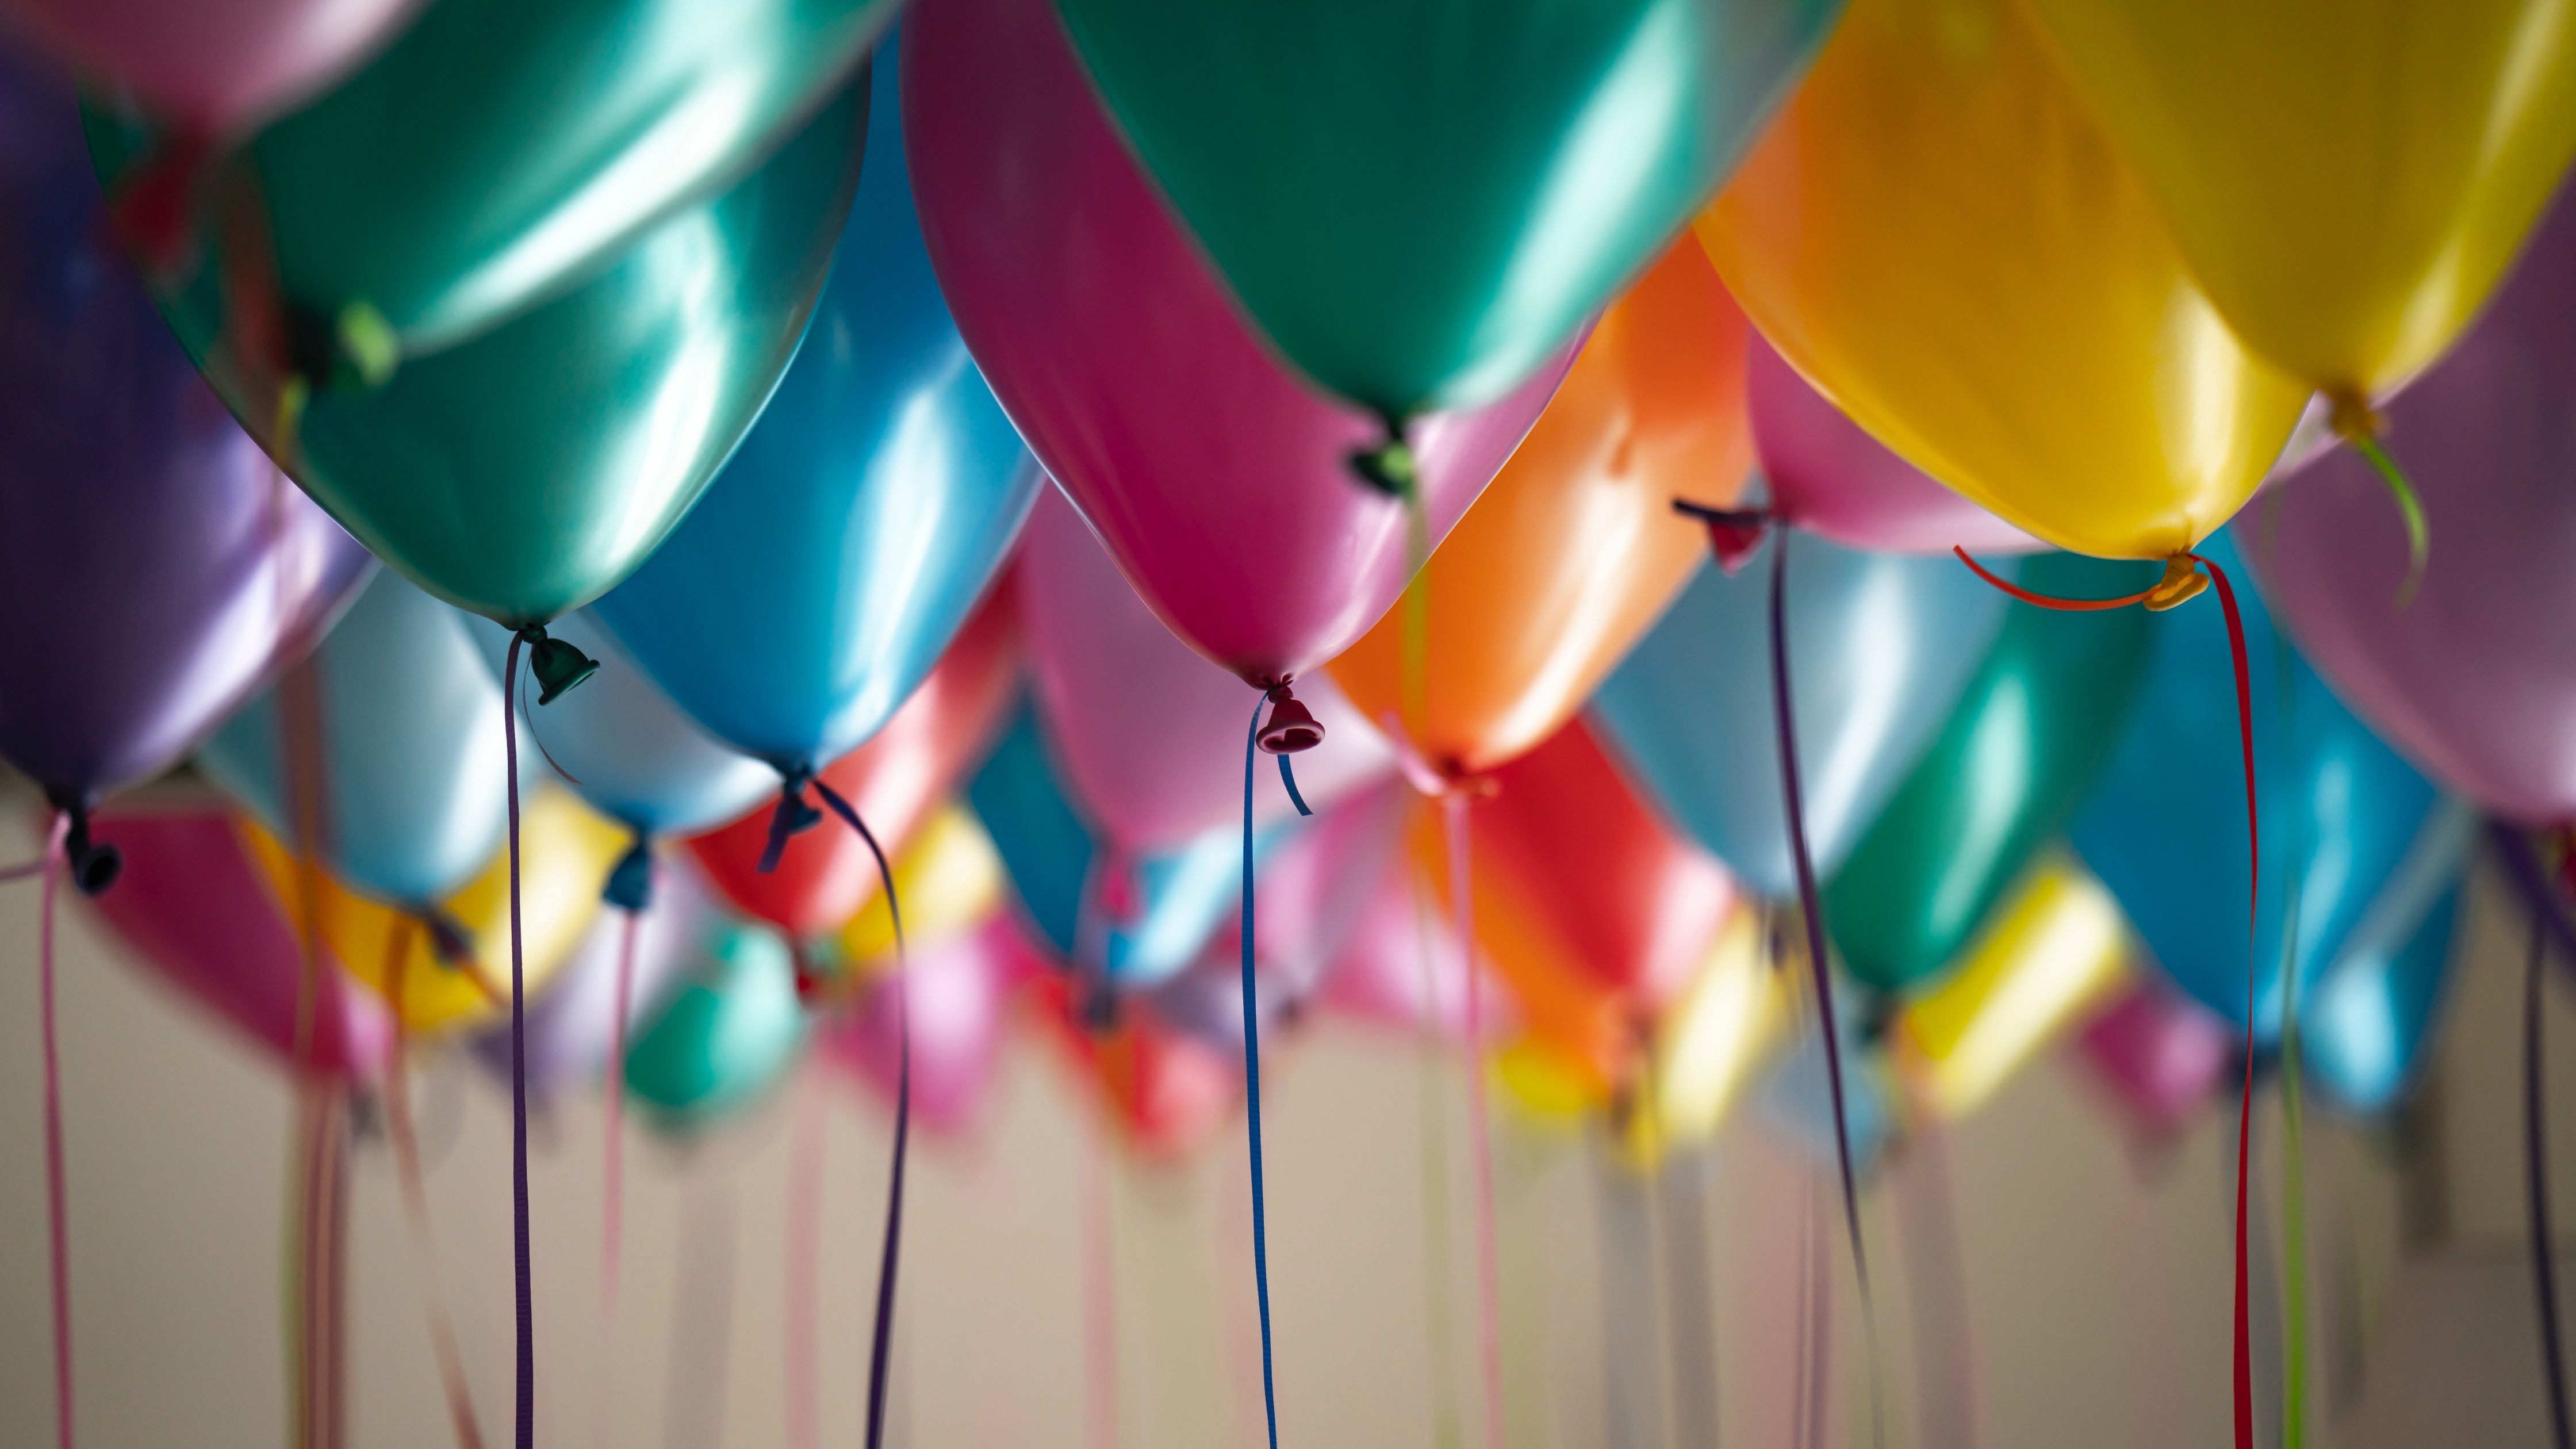 Colorful balloons Wallpaper 4K, Birthday, Decoration, Party, 5K